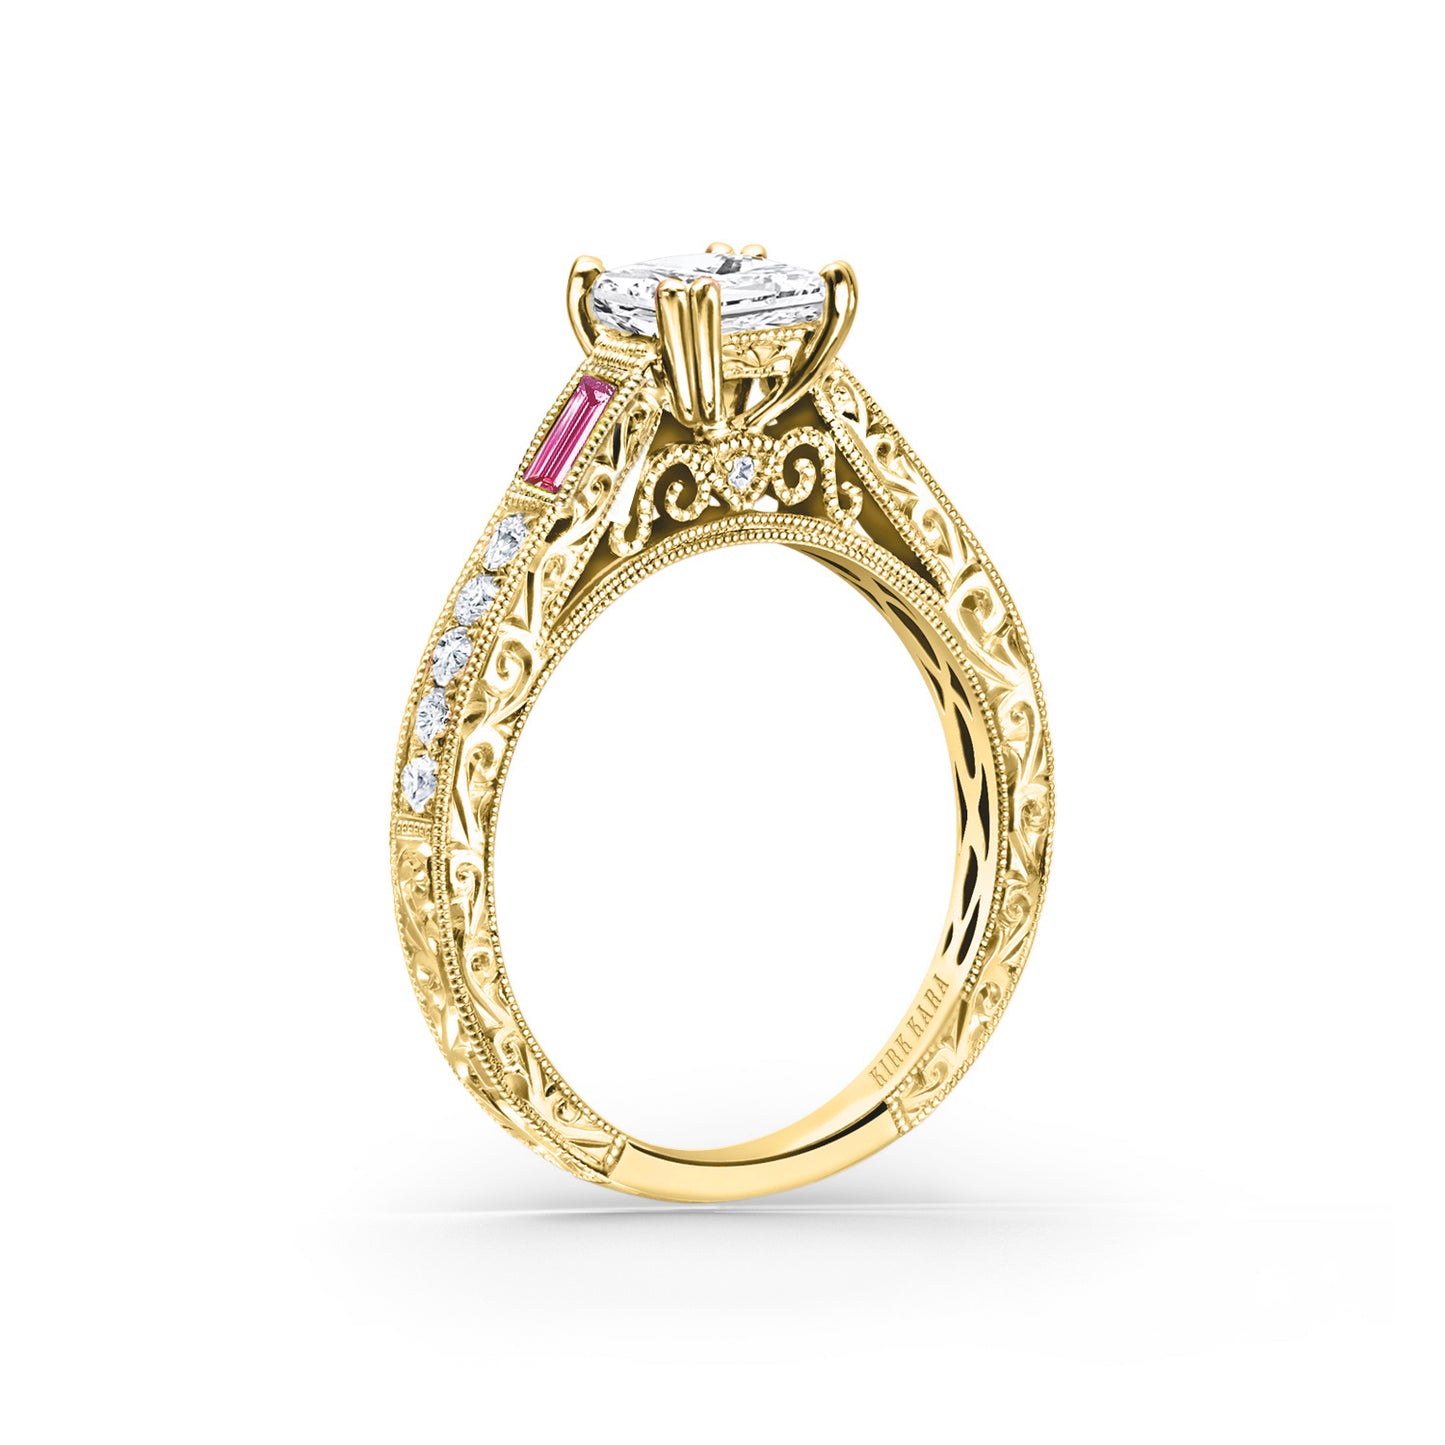 Baguette Engraved Pink Sapphire Diamond Engagement Ring